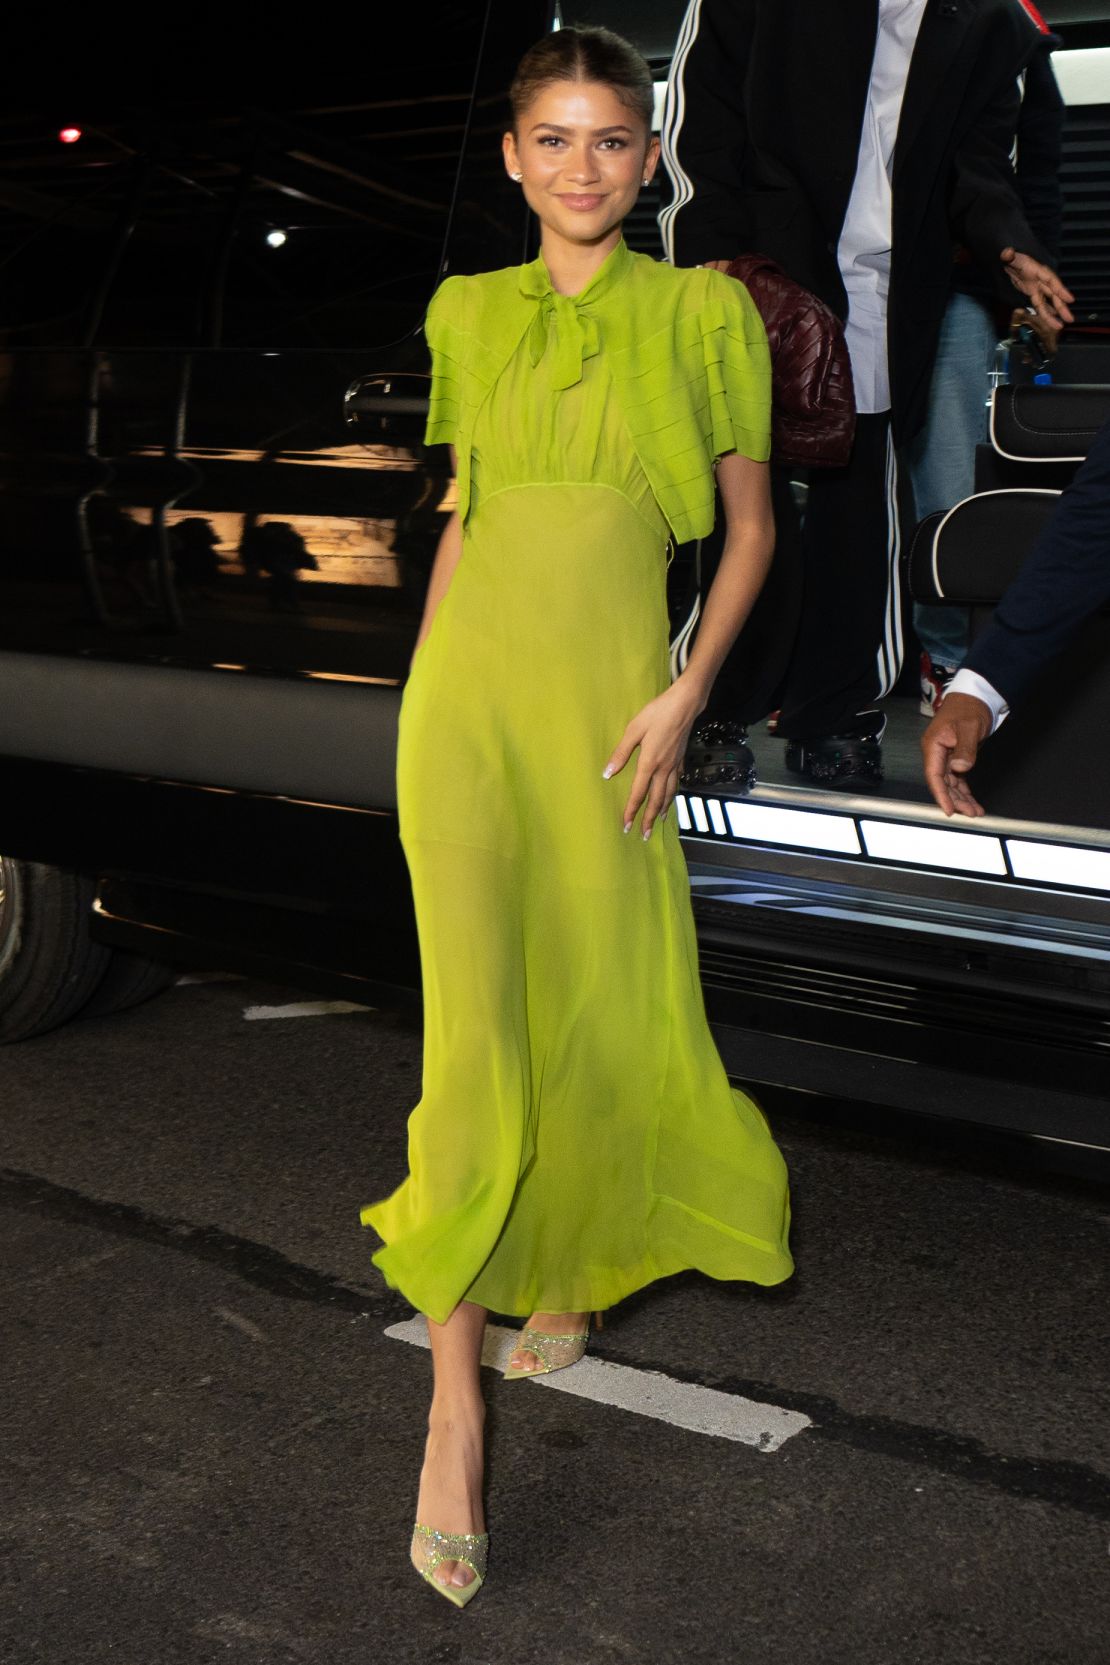 On April 24, the actor stepped out in a twee silk chiffon dress — a vintage piece nearly a century old, "<a href="index.php?page=&url=https%3A%2F%2Fwww.vogue.com%2Farticle%2Fzendaya-challengers-look-nearly-100-years-old" target="_blank">Vogue" reported</a> — and matching cropped jacket in the acid green (read: tennis ball) hue that had repeated throughout the "Challengers" press tour.